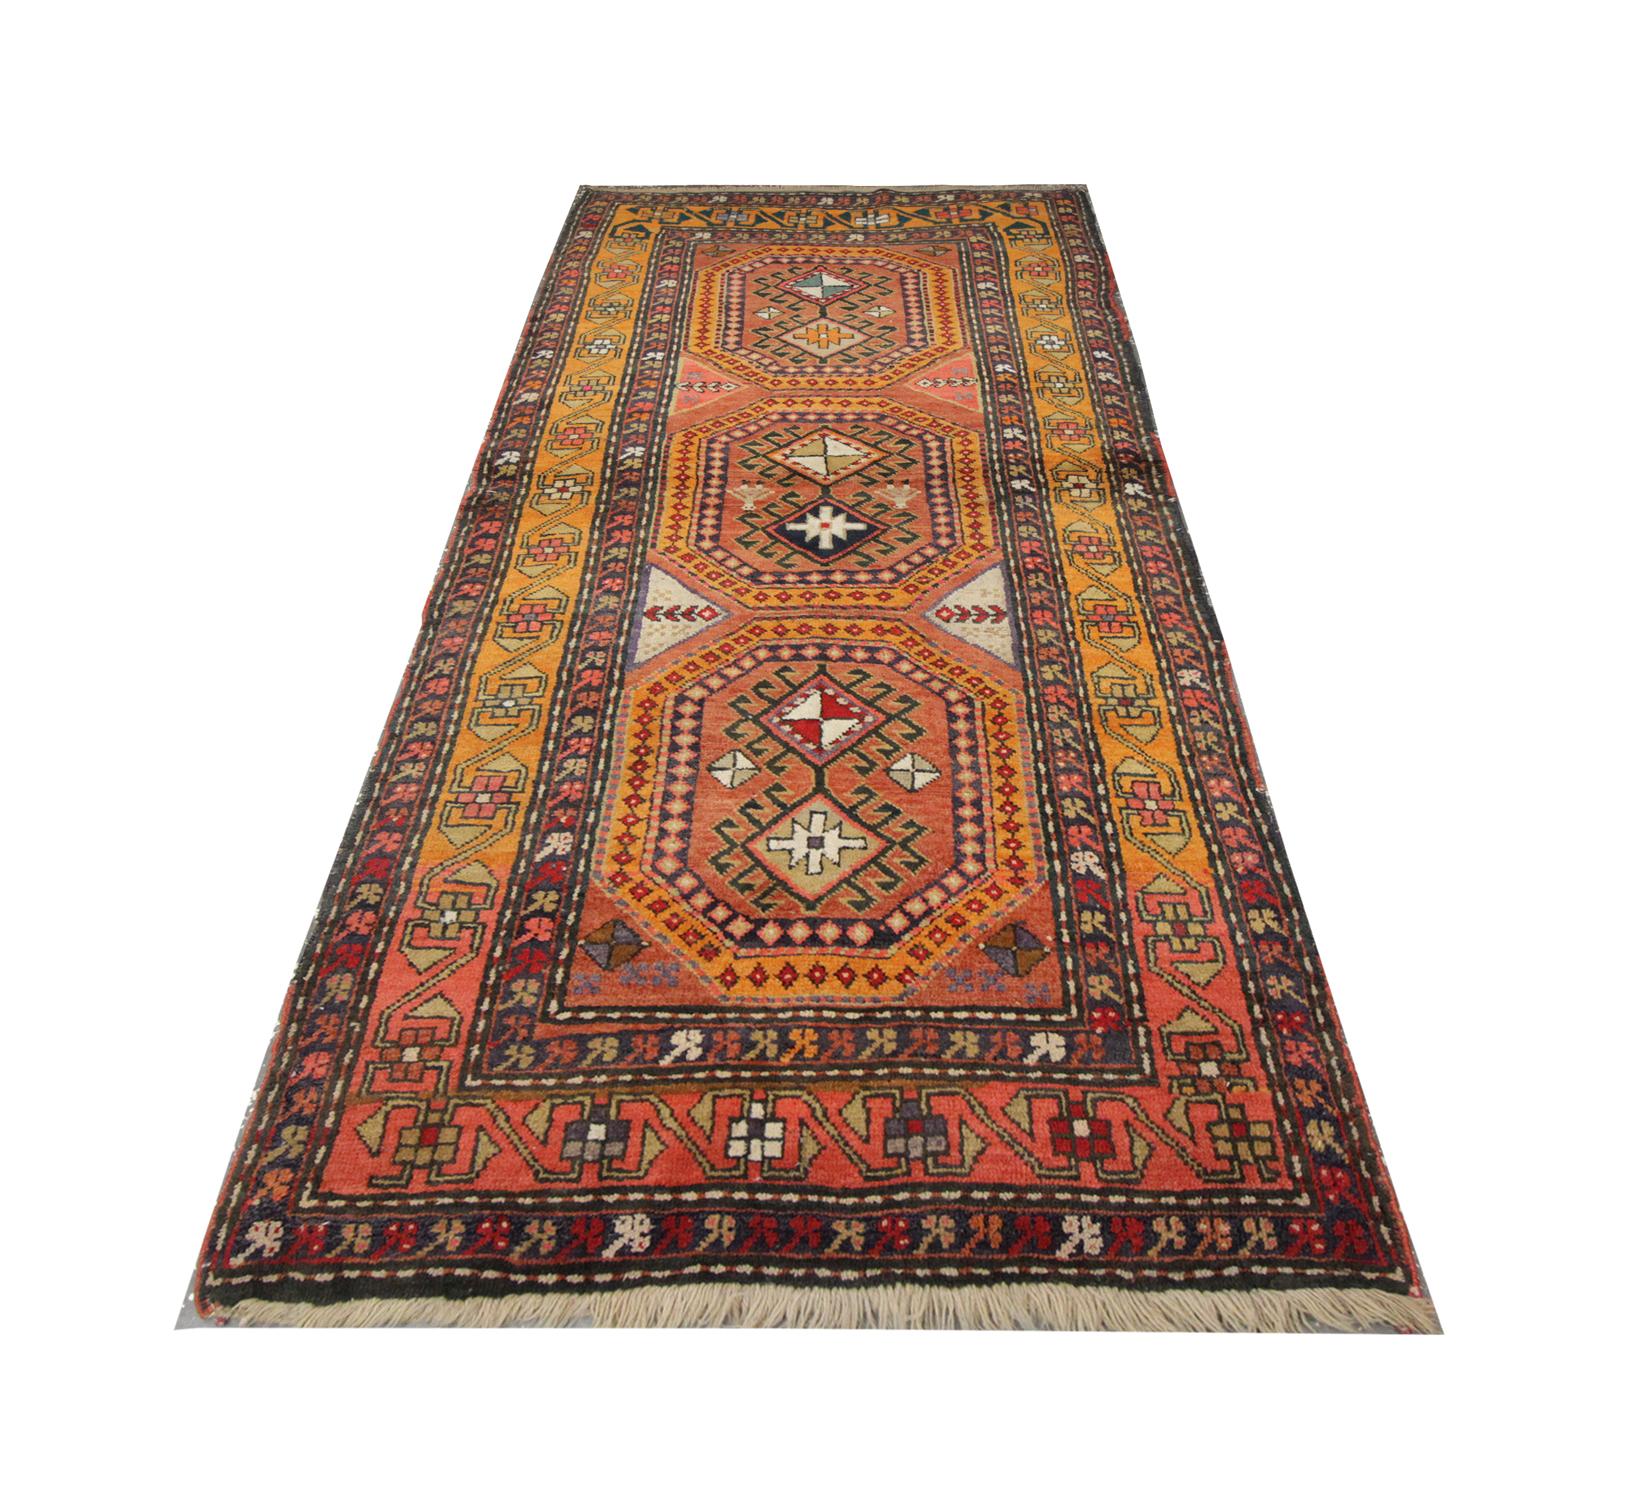 The multi-layered border is beautifully woven with a repeat pattern throughout. The contrast between the orange and brown hues works perfectly to create this eye-catching one of a kind antique rug. This stunning intricately detailed area rug has